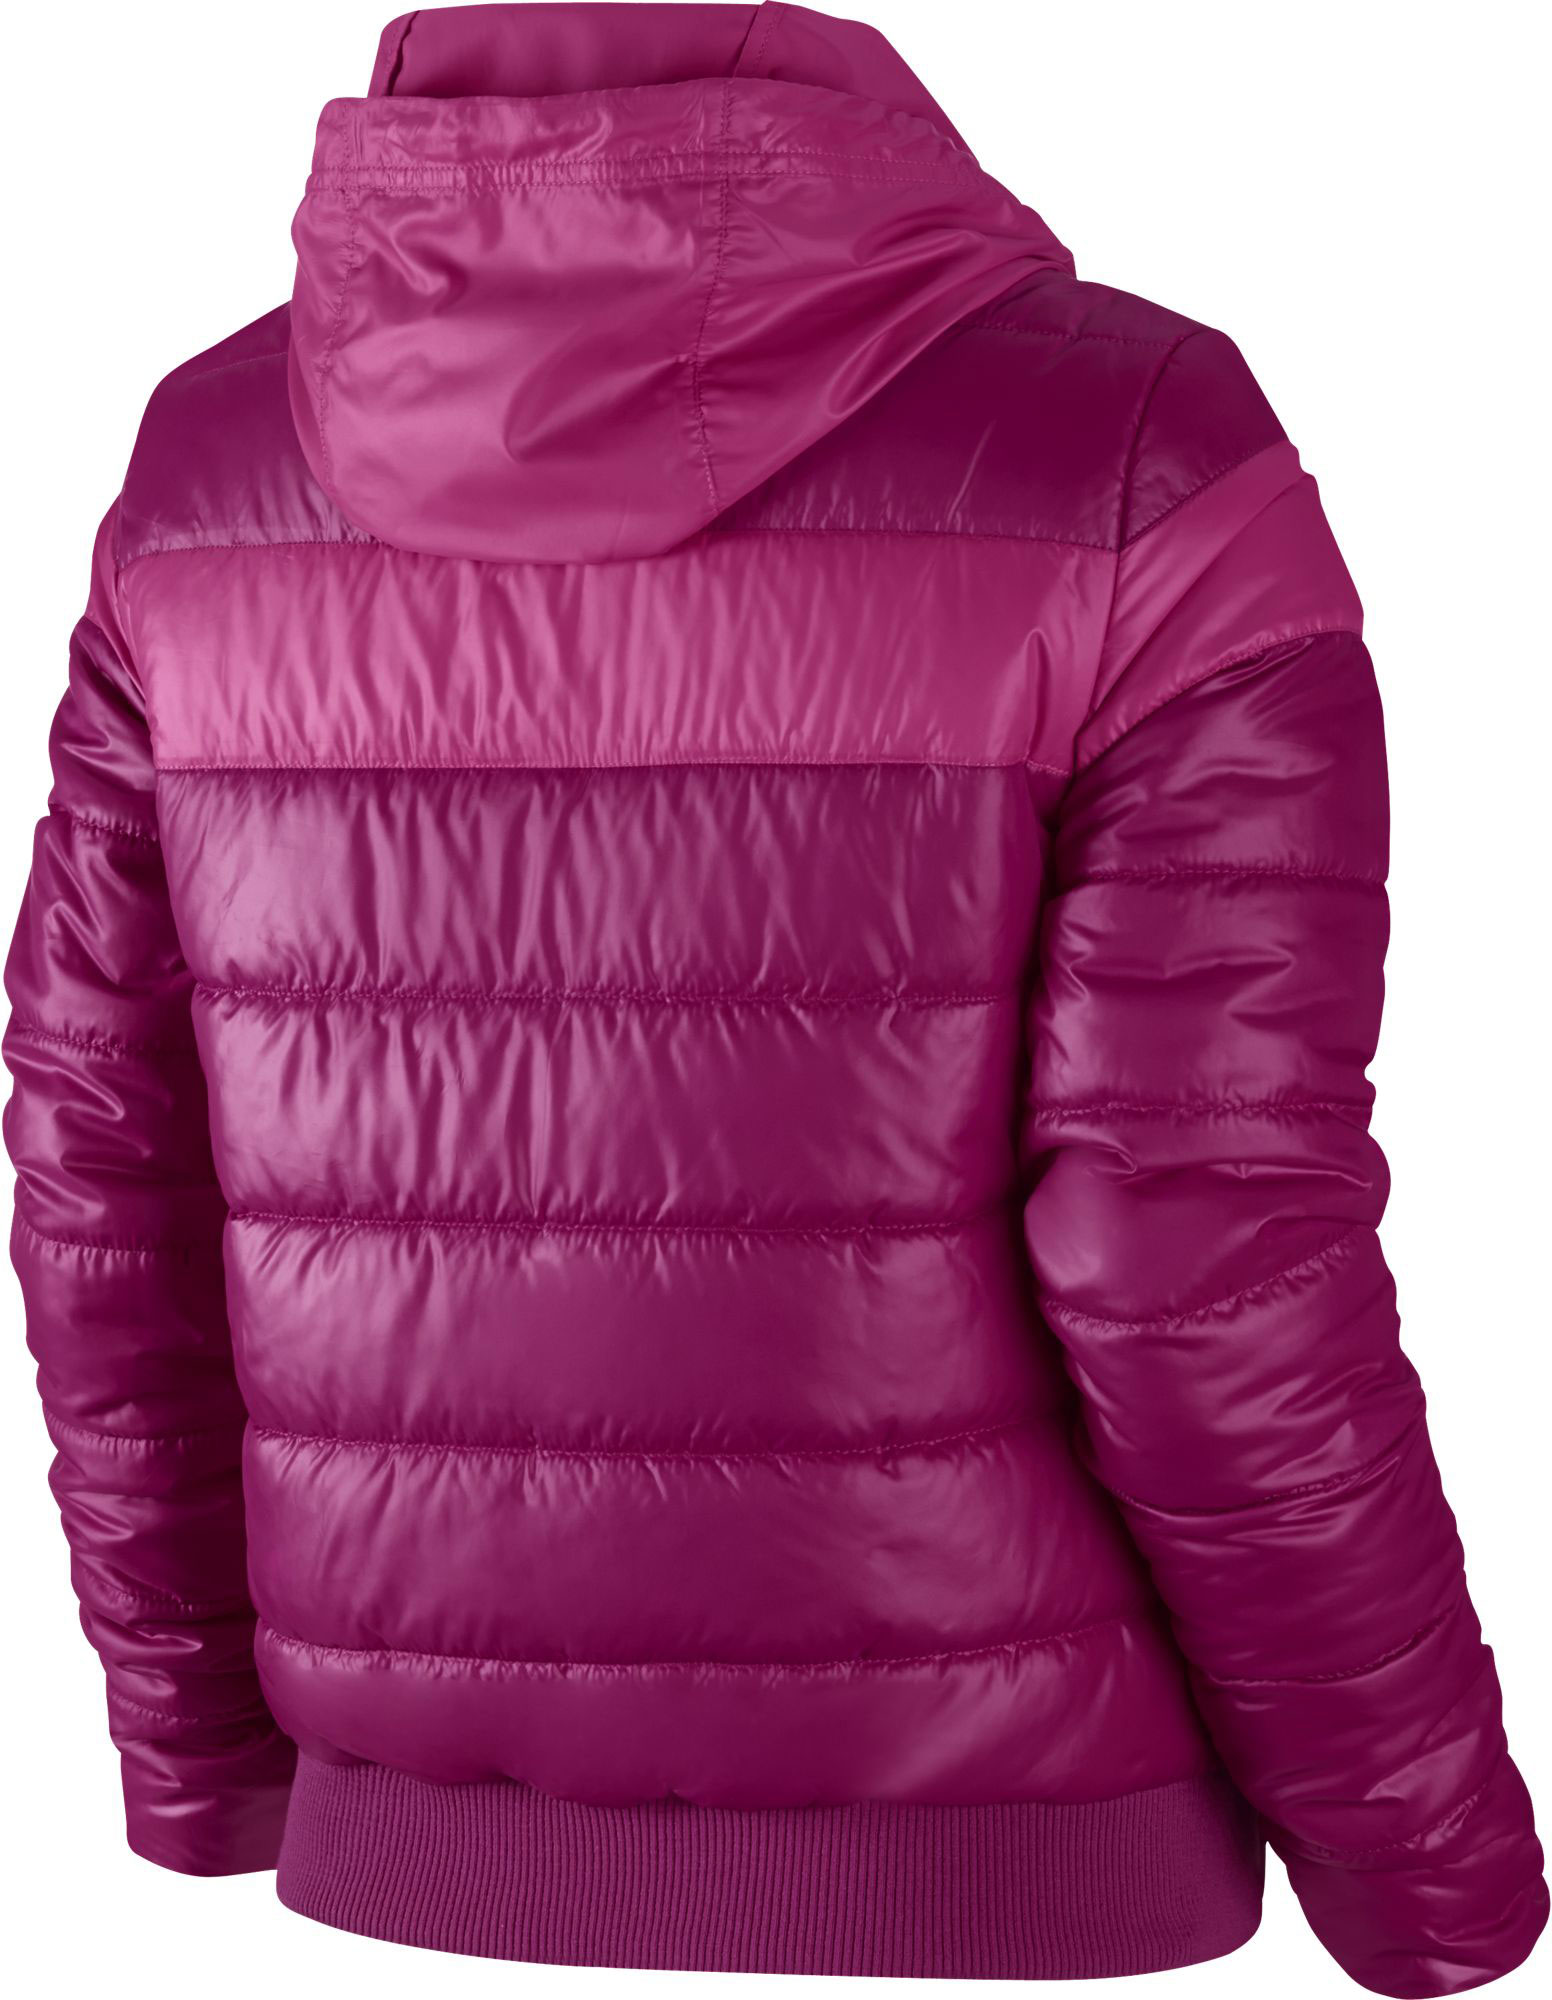 VICTORY - Women's Padded Jacket